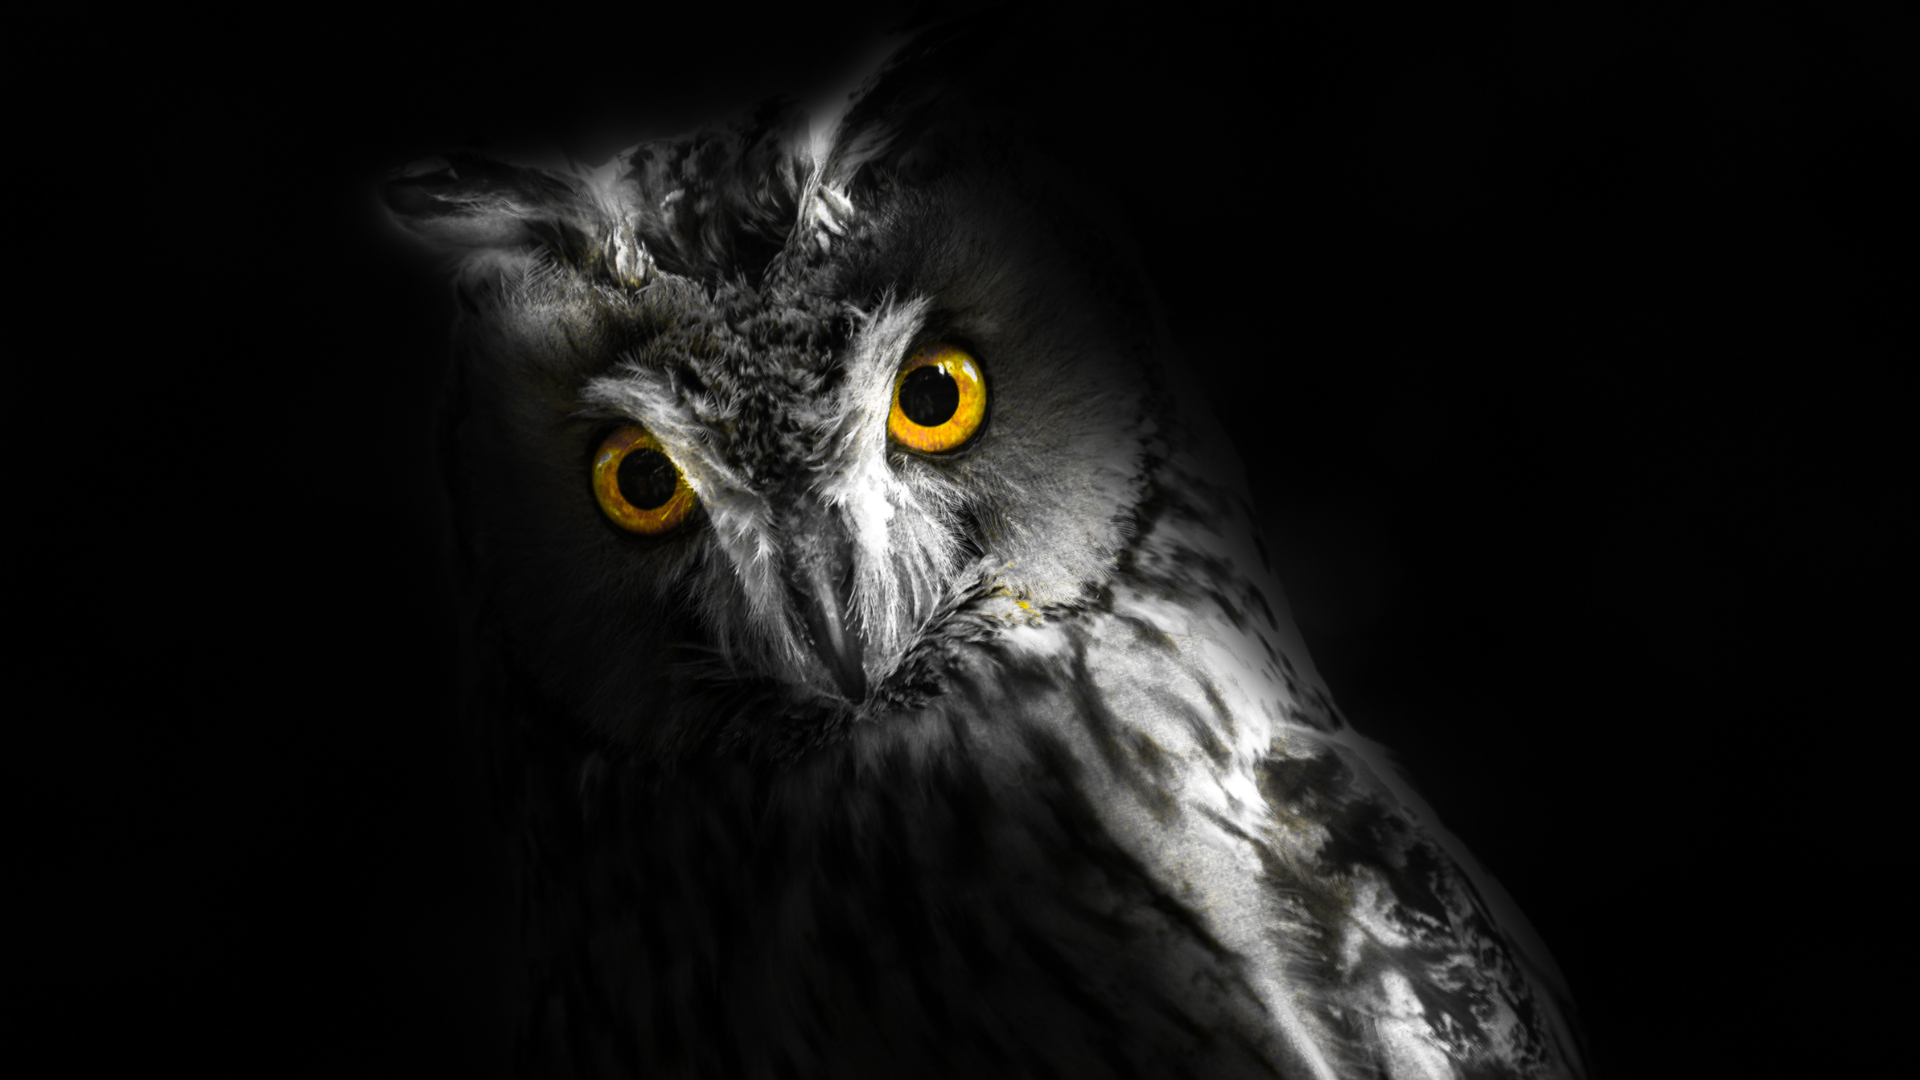 A spooky grey owl looks directly at the camera with orange eyes.